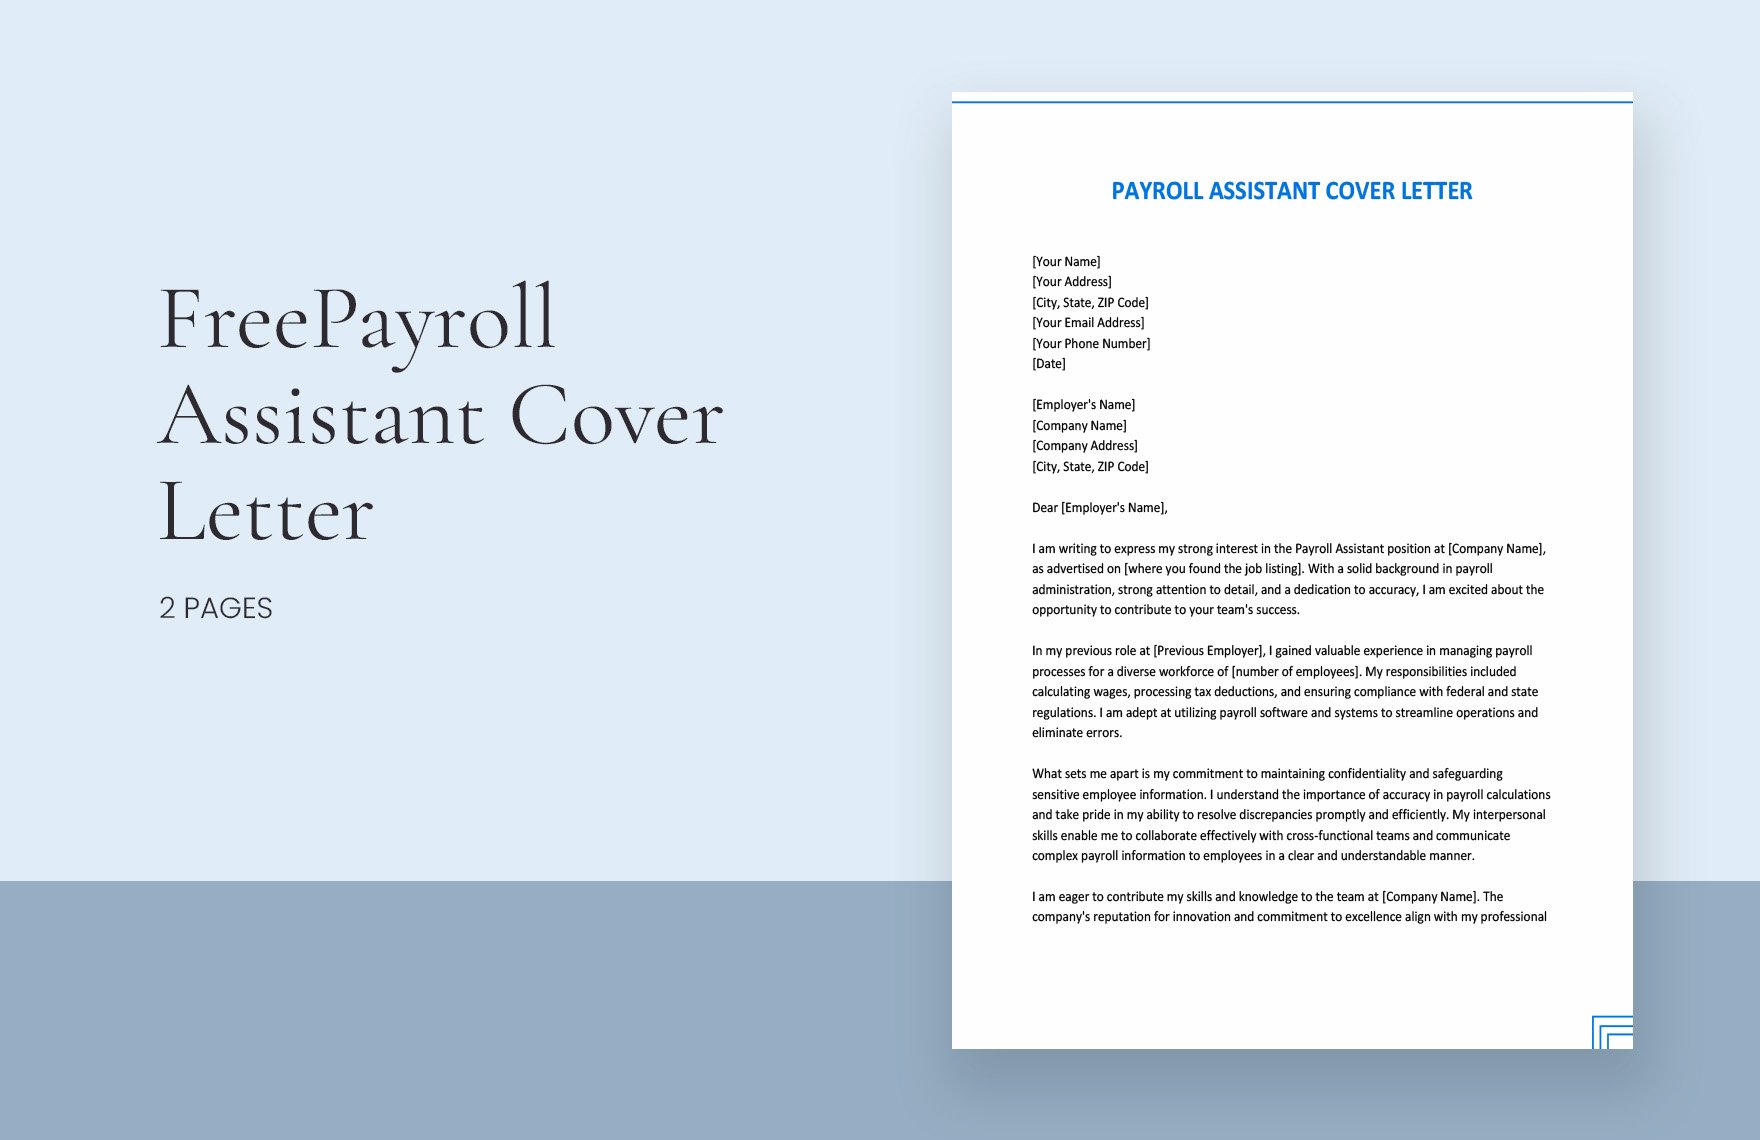 Payroll Assistant Cover Letter in Word, Google Docs